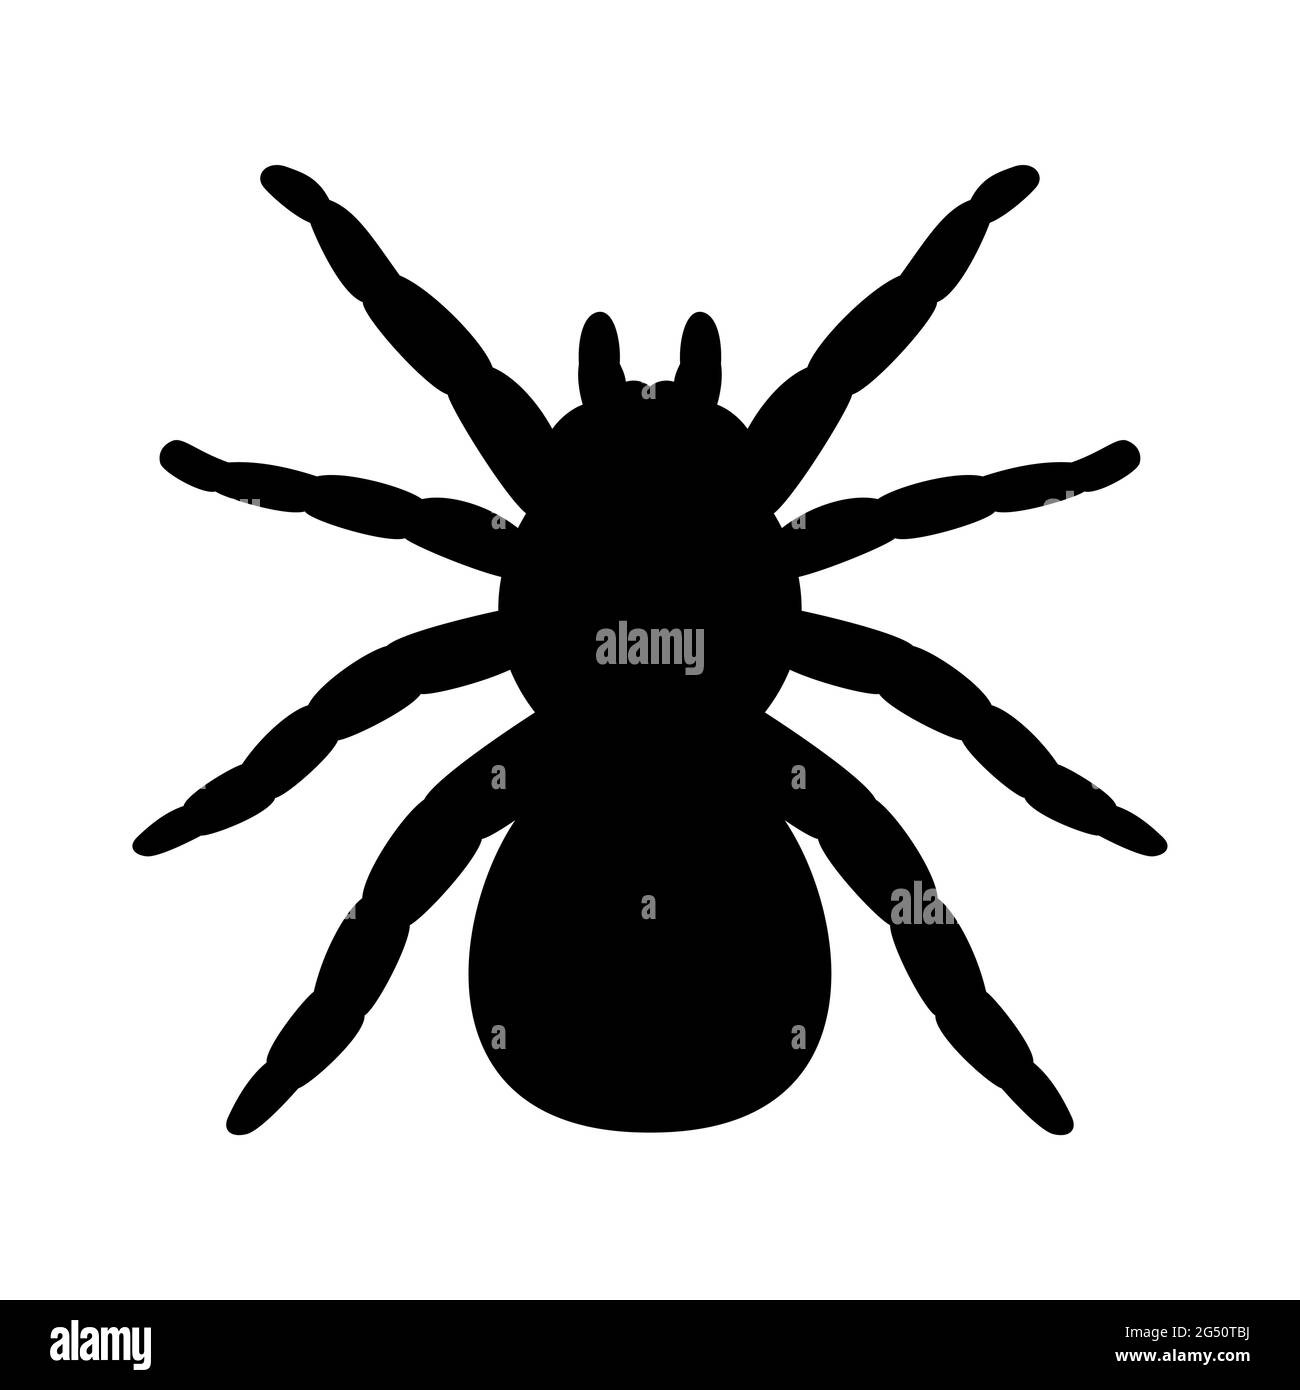 Tarantula spider silhouette. Vector illustration isolated on white background, logo tarantula spider silhouette, top view. Stock Vector